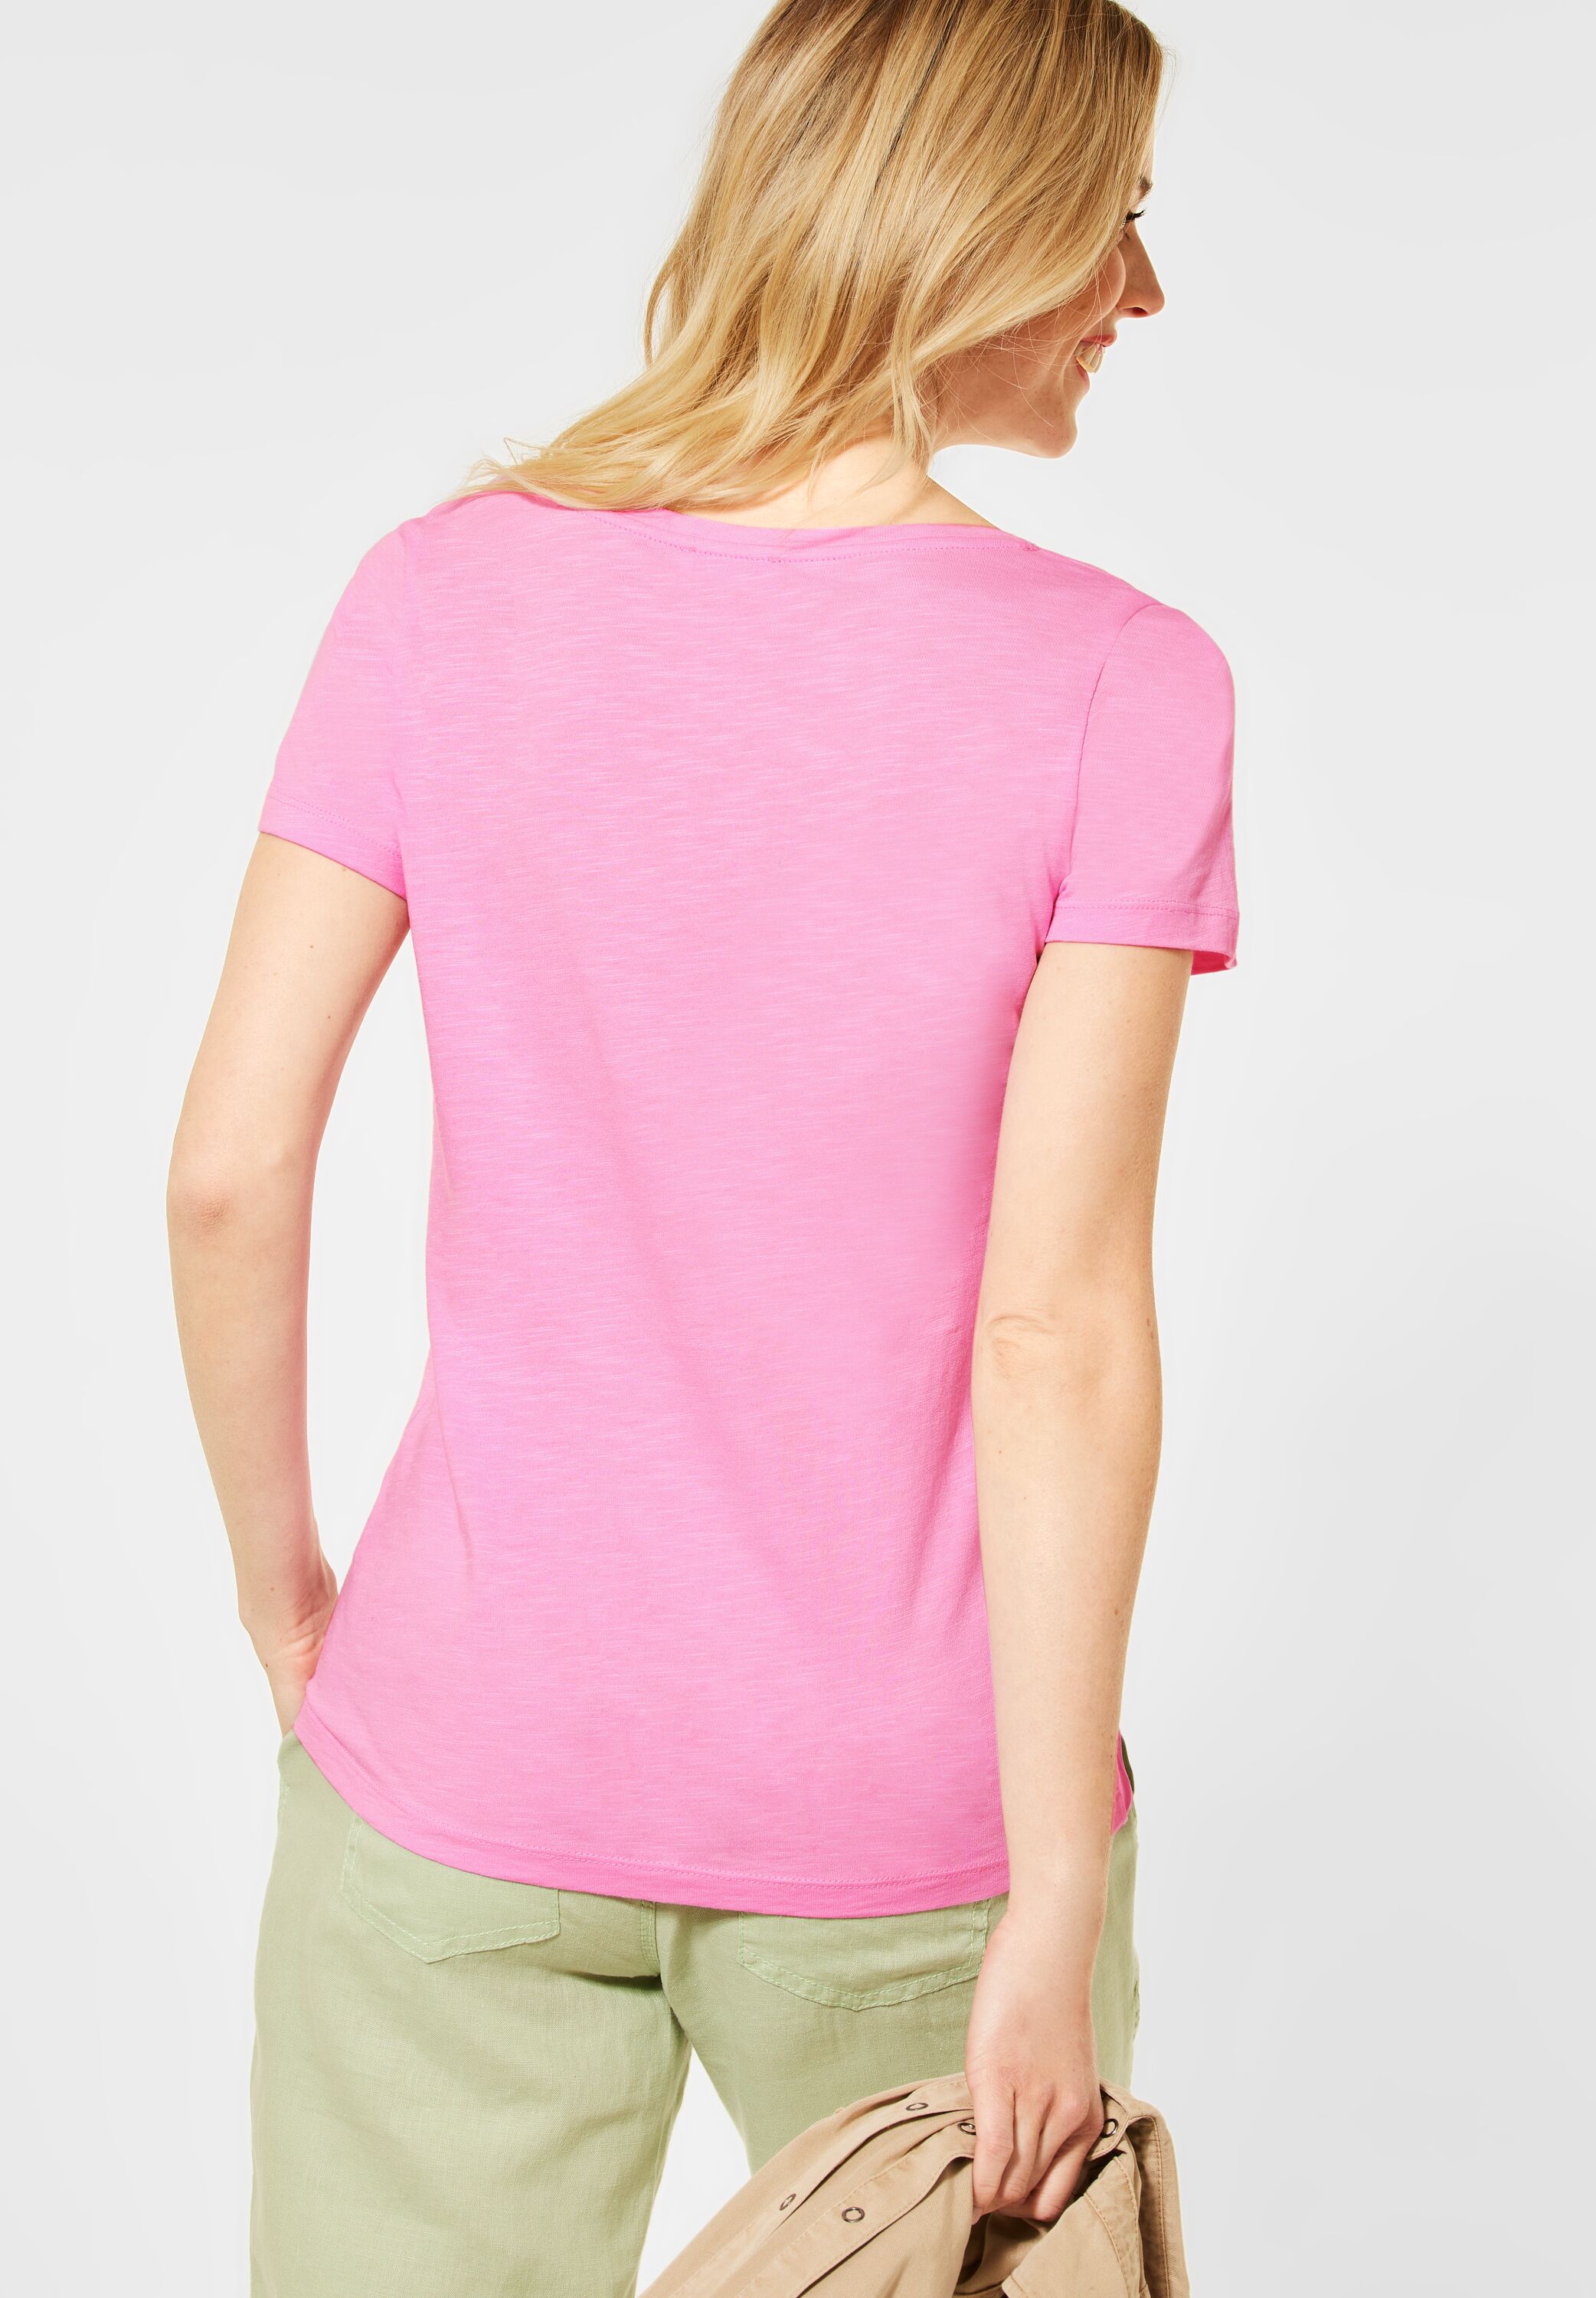 Street One T-Shirt A316300-12979 in Mode Pearl Rose CONCEPT - Gerda